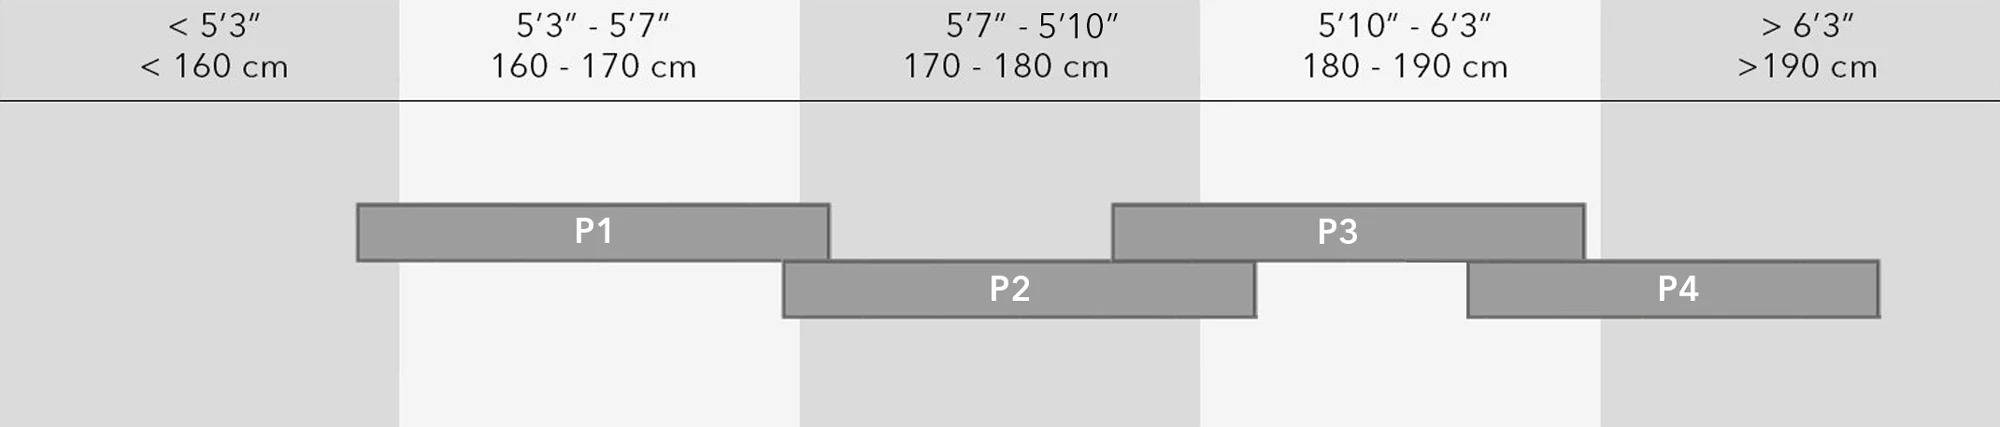 Privateer sizing chart